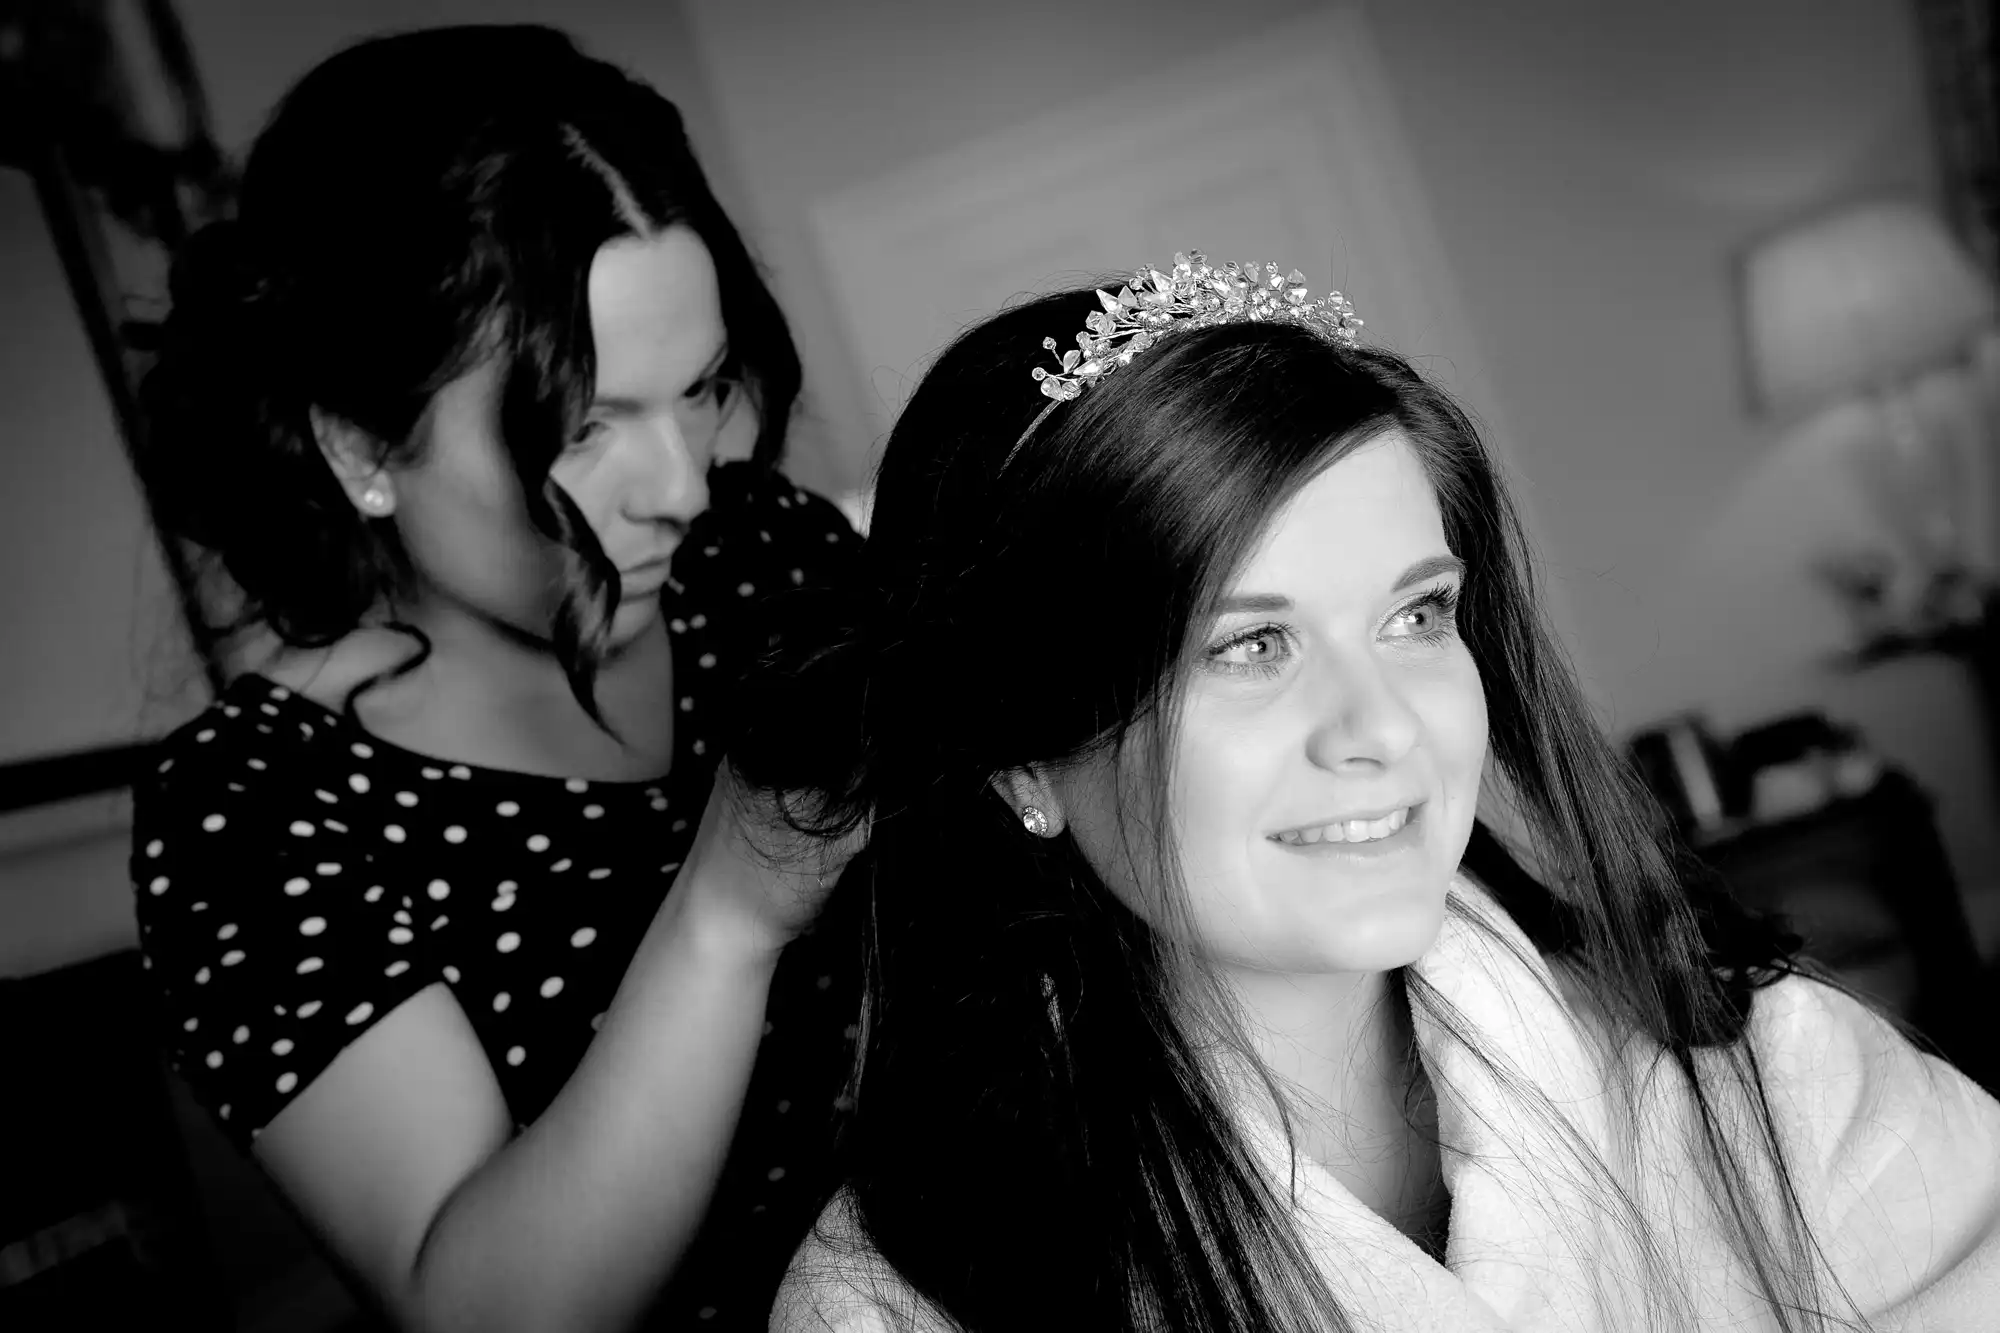 A woman in a white robe and tiara smiles while another woman styles her hair in a room with soft lighting.